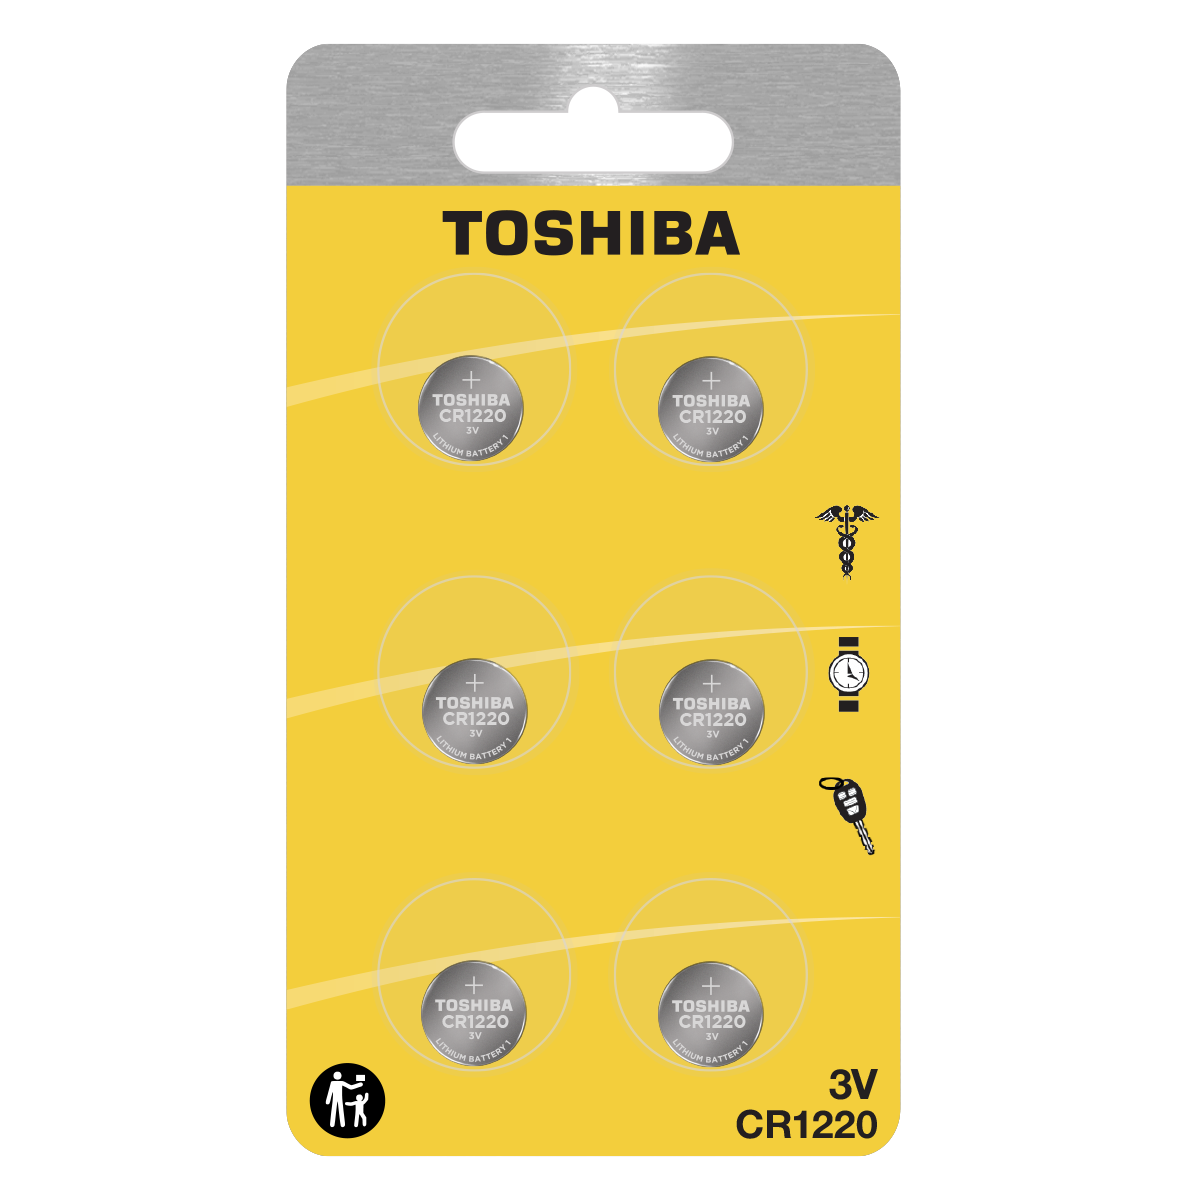    Toshiba CR1220 Battery 3V Lithium Coin Cell (6 PCS Child Resistant Blister Package) 